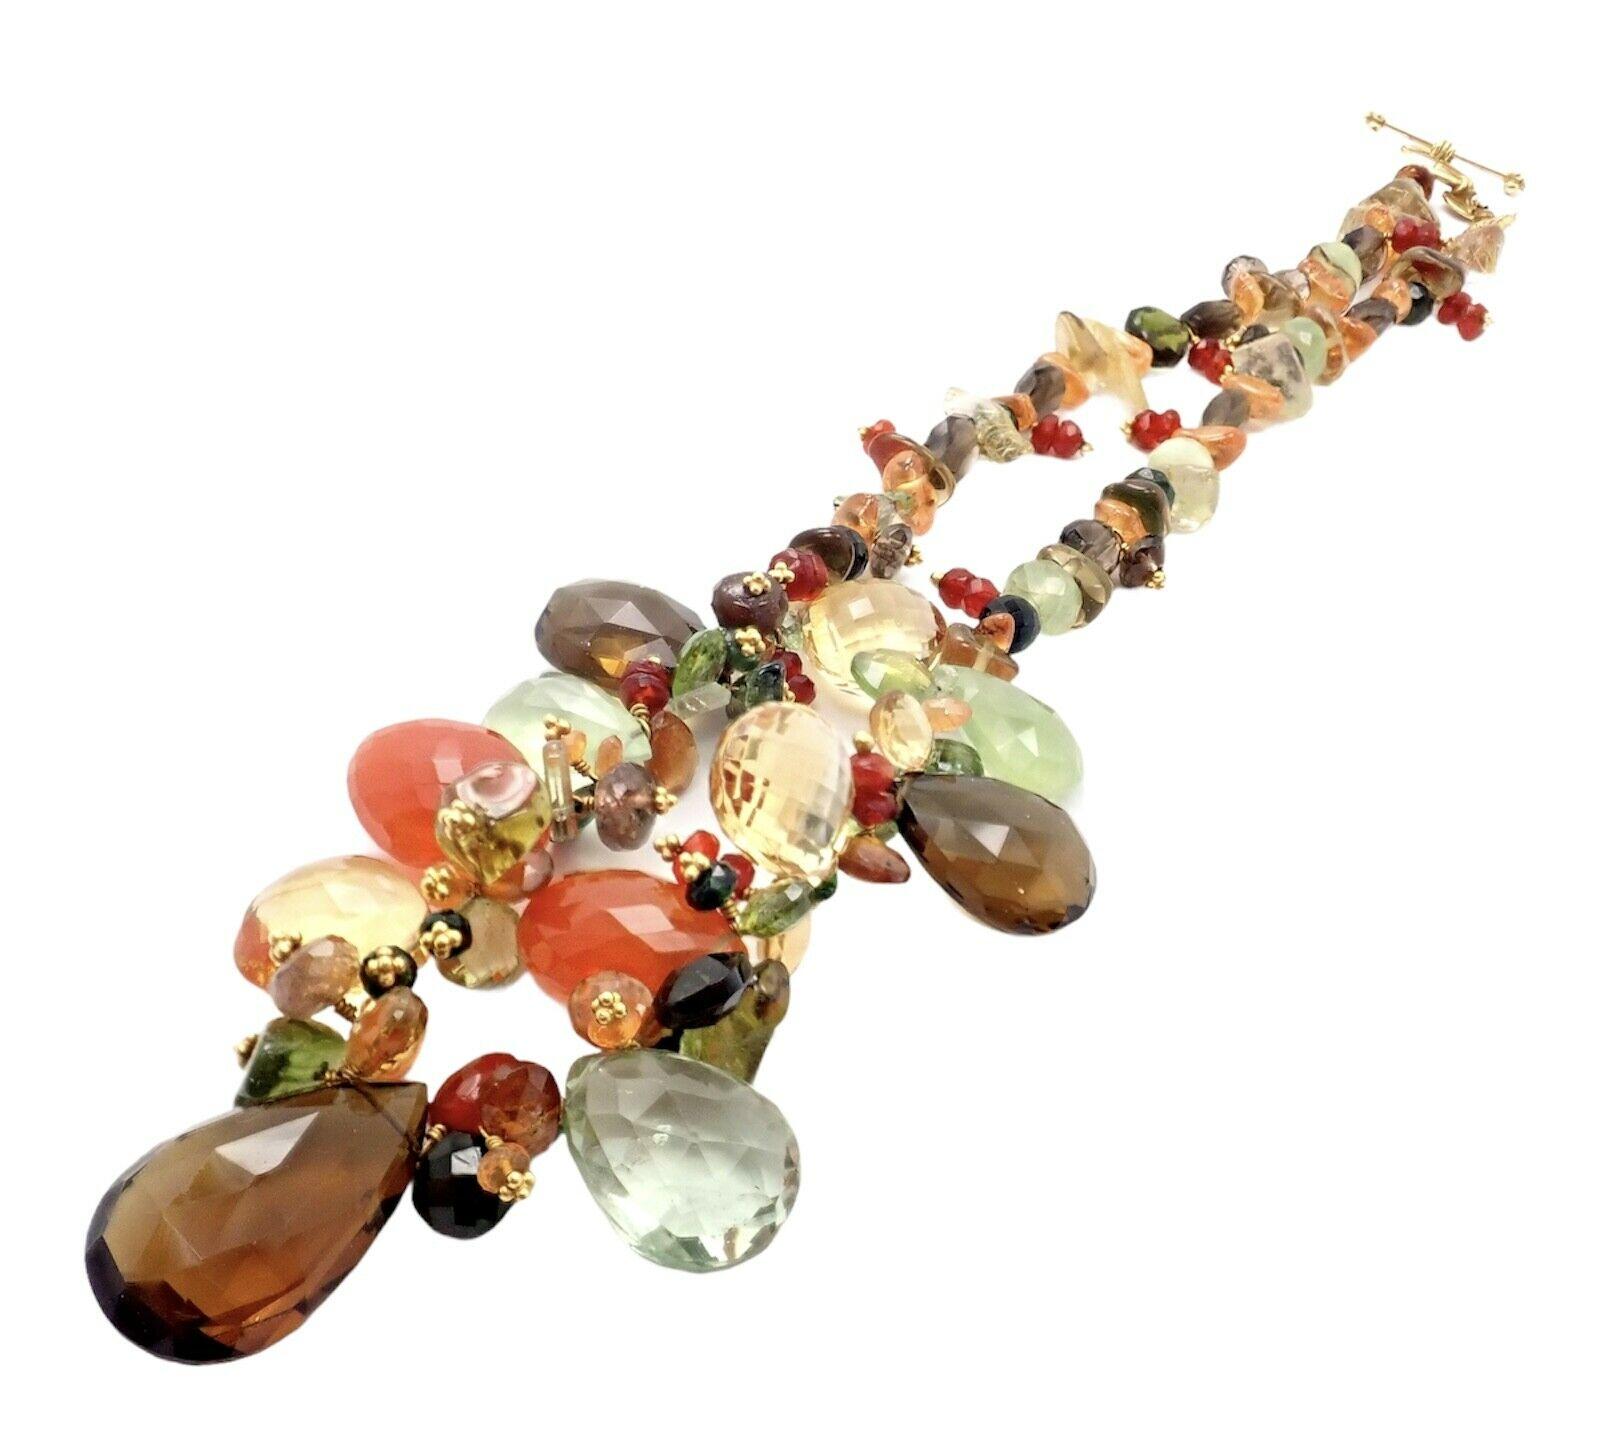 22k Yellow Gold Briolette Onyx Orange Spessartite Candy Bead Necklace By Laura Gibson.
With 2 Large Orange Spessartite Garnet: 15mm x 17mm, Large Quartz, Aquamarines, and other great large color stones

 Details:
 Length: 16.5